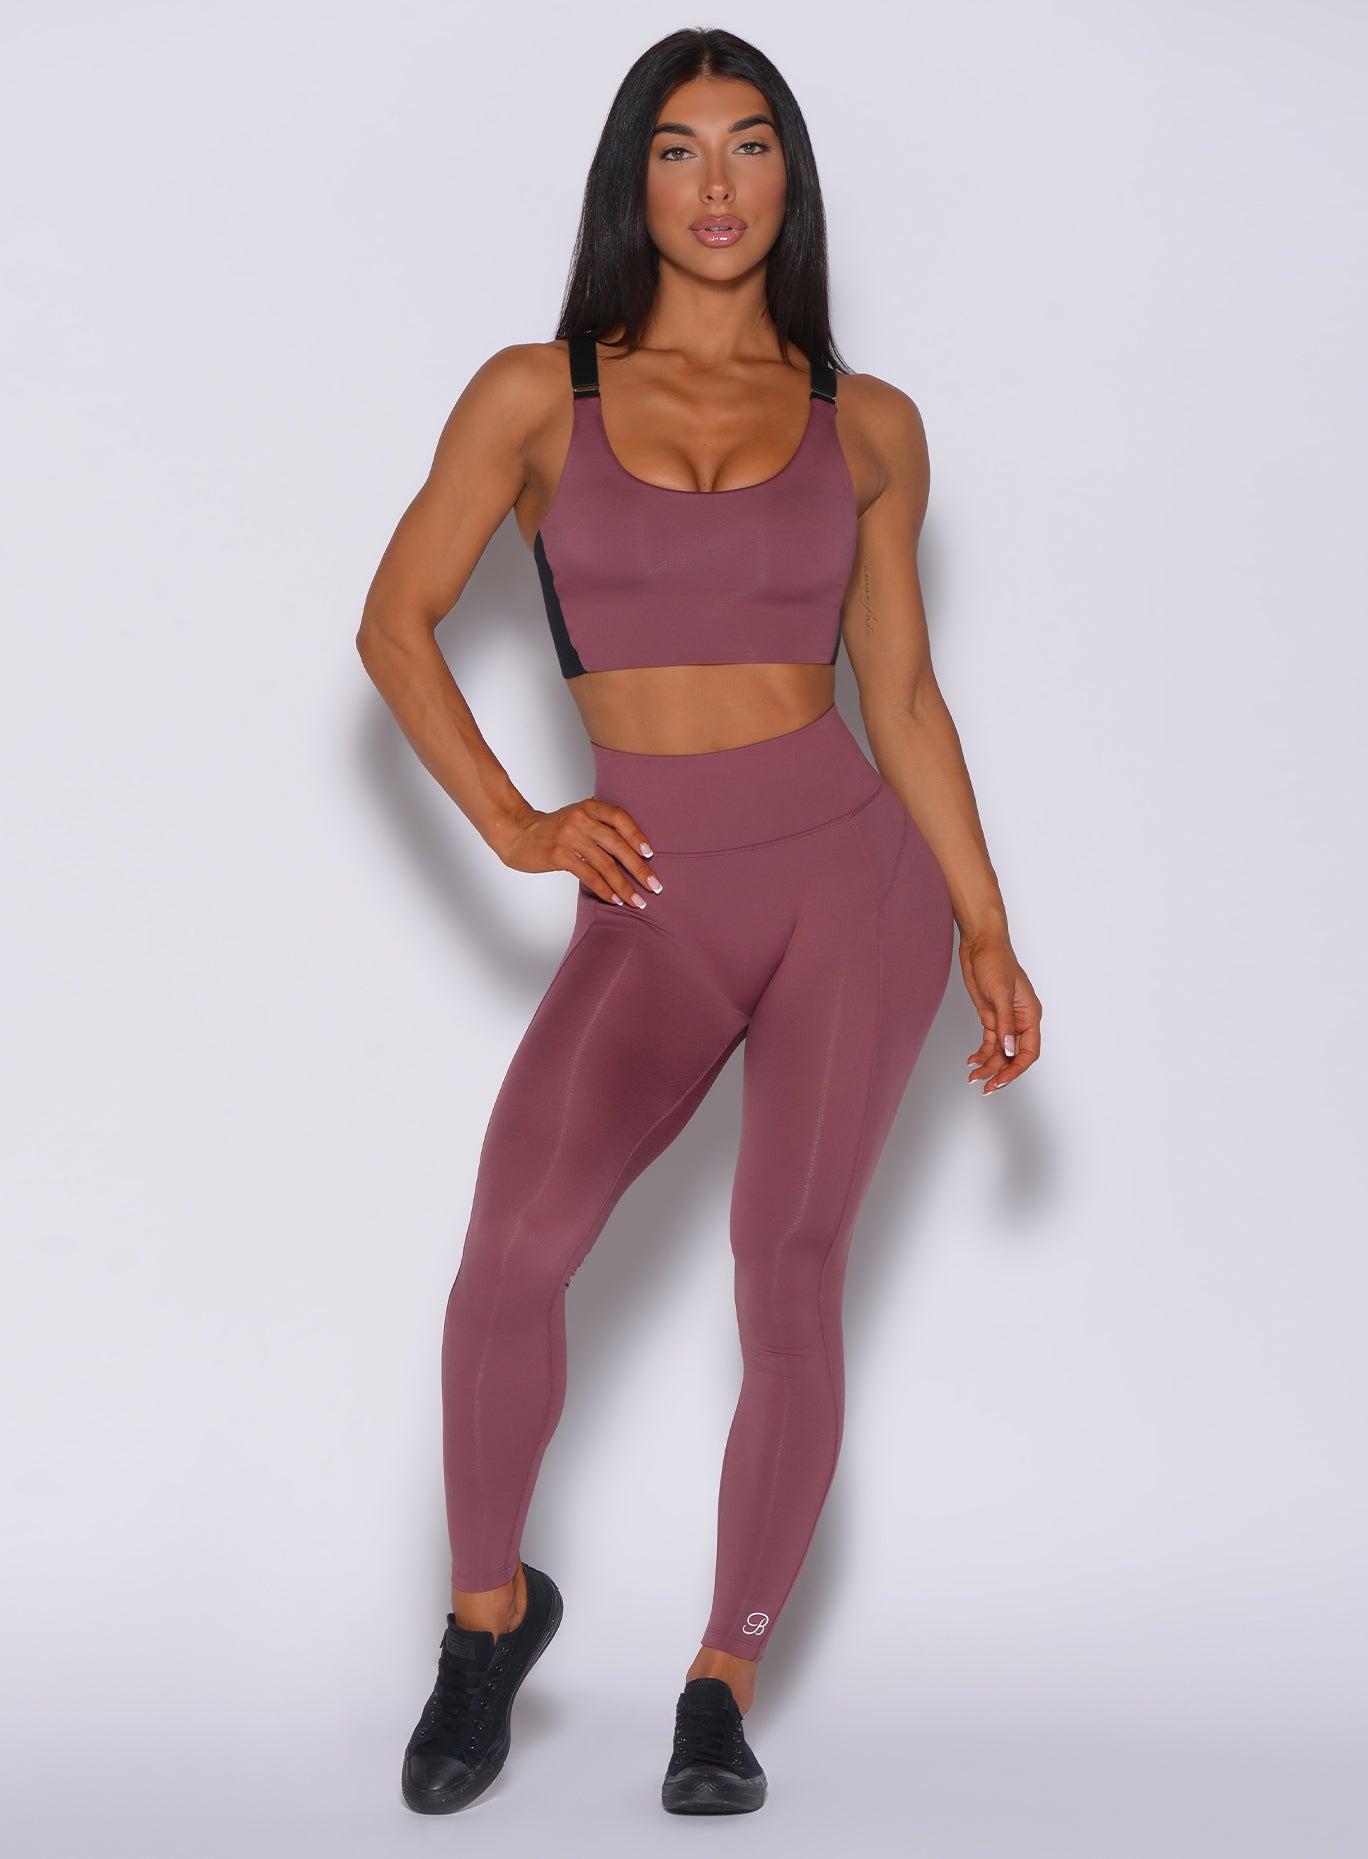 Model facing forward wearing our snatched waist leggings in merlot color and a matching bra